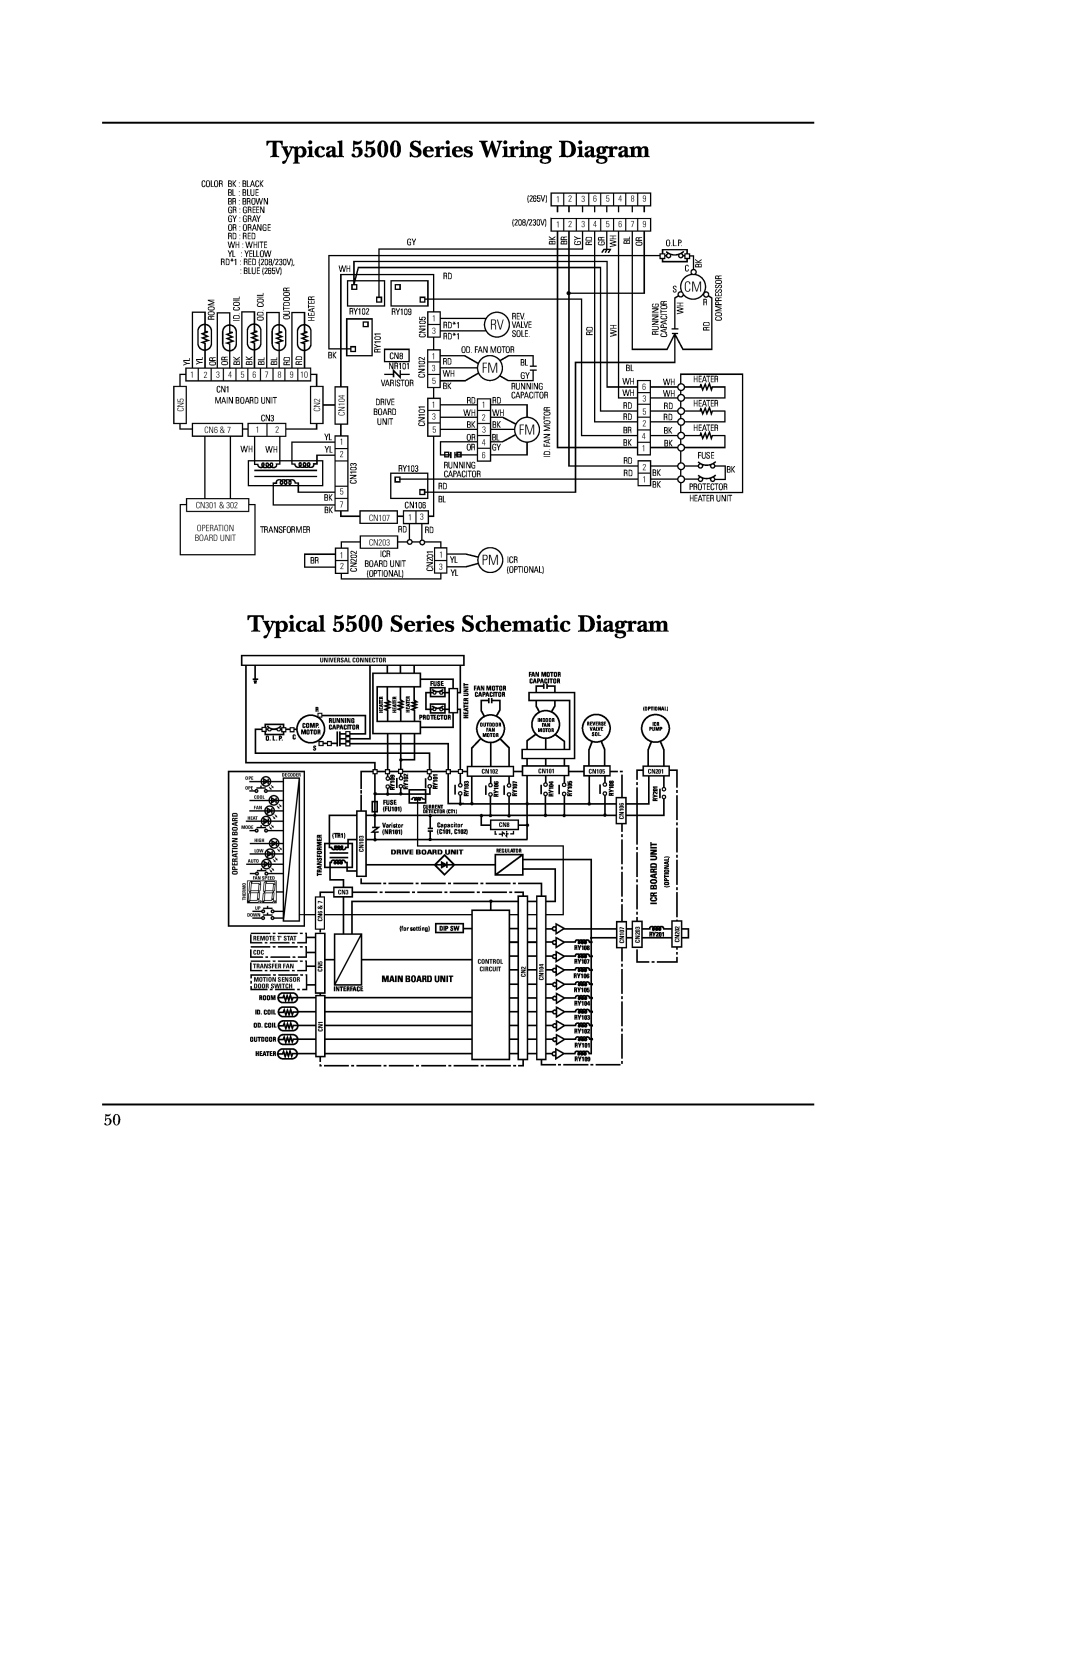 GE manual Typical 5500 Series Wiring Diagram, Typical 5500 Series Schematic Diagram, Pm Icr 